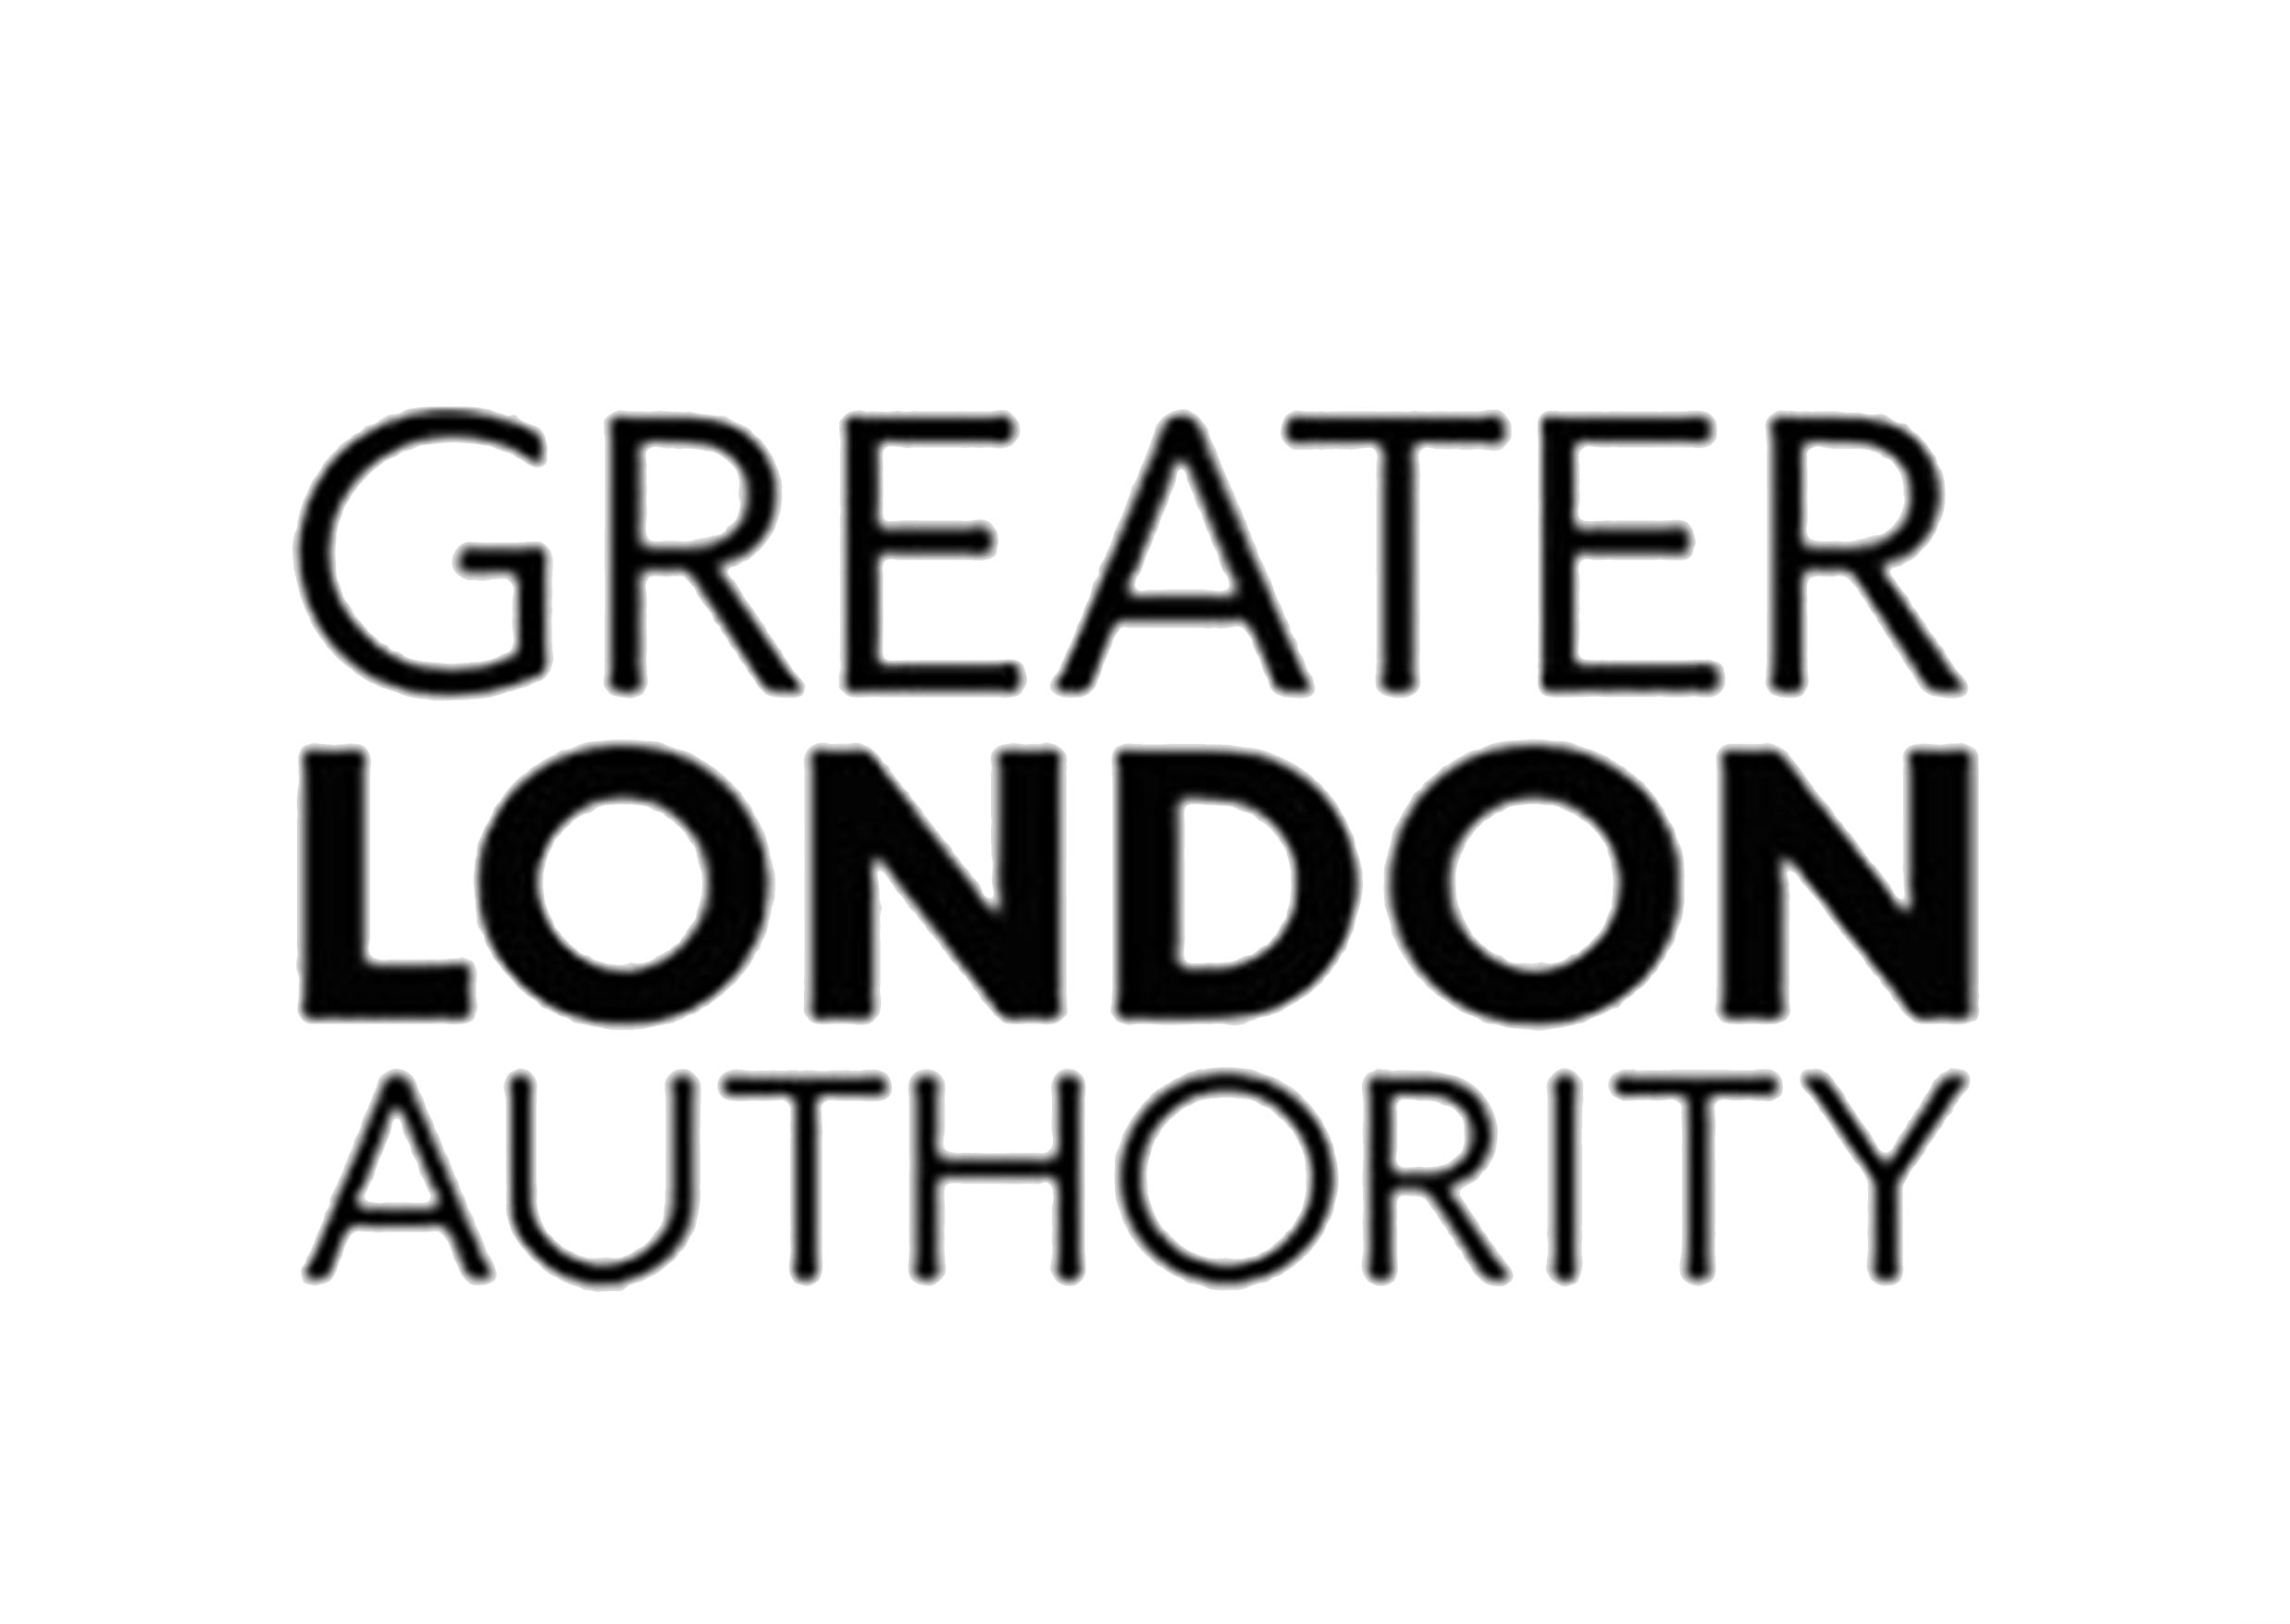 8. Greater London Authority